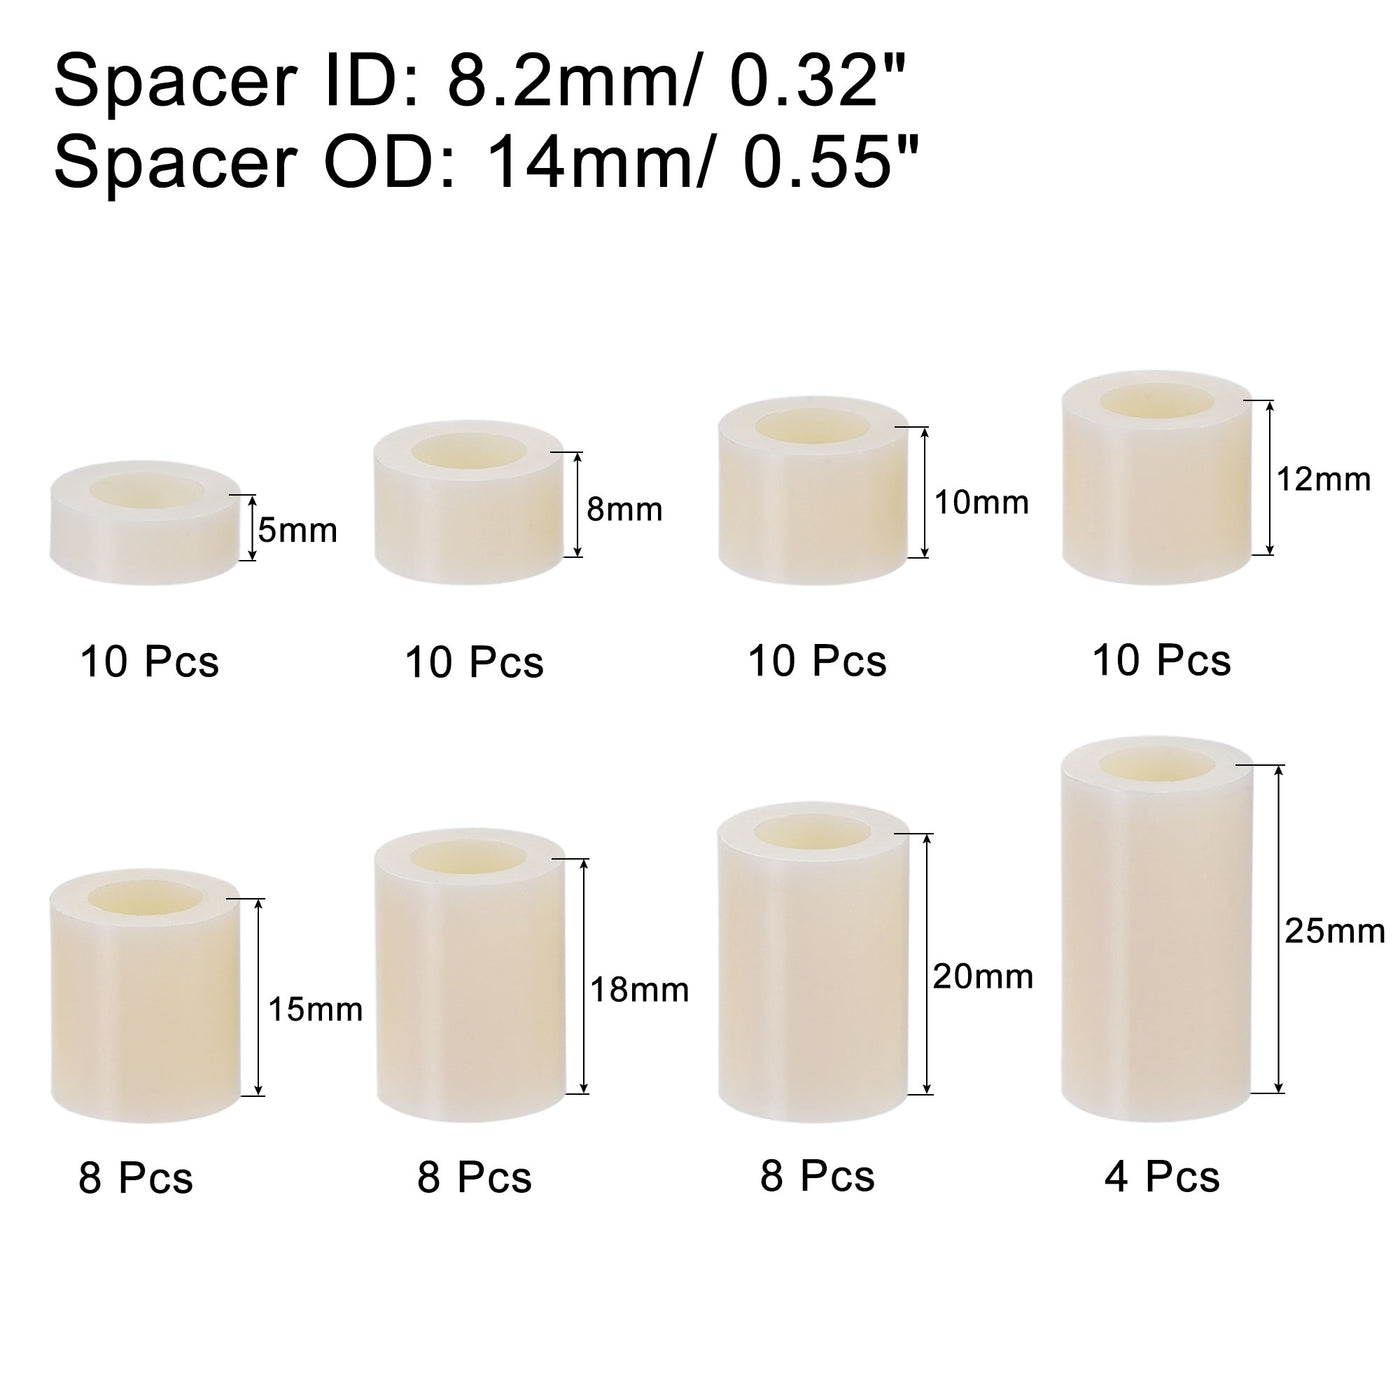 uxcell Uxcell ABS Round Spacer Assortment Kit ID 8.2mm OD 14mm, 8 Sizes Standoff, 68pcs